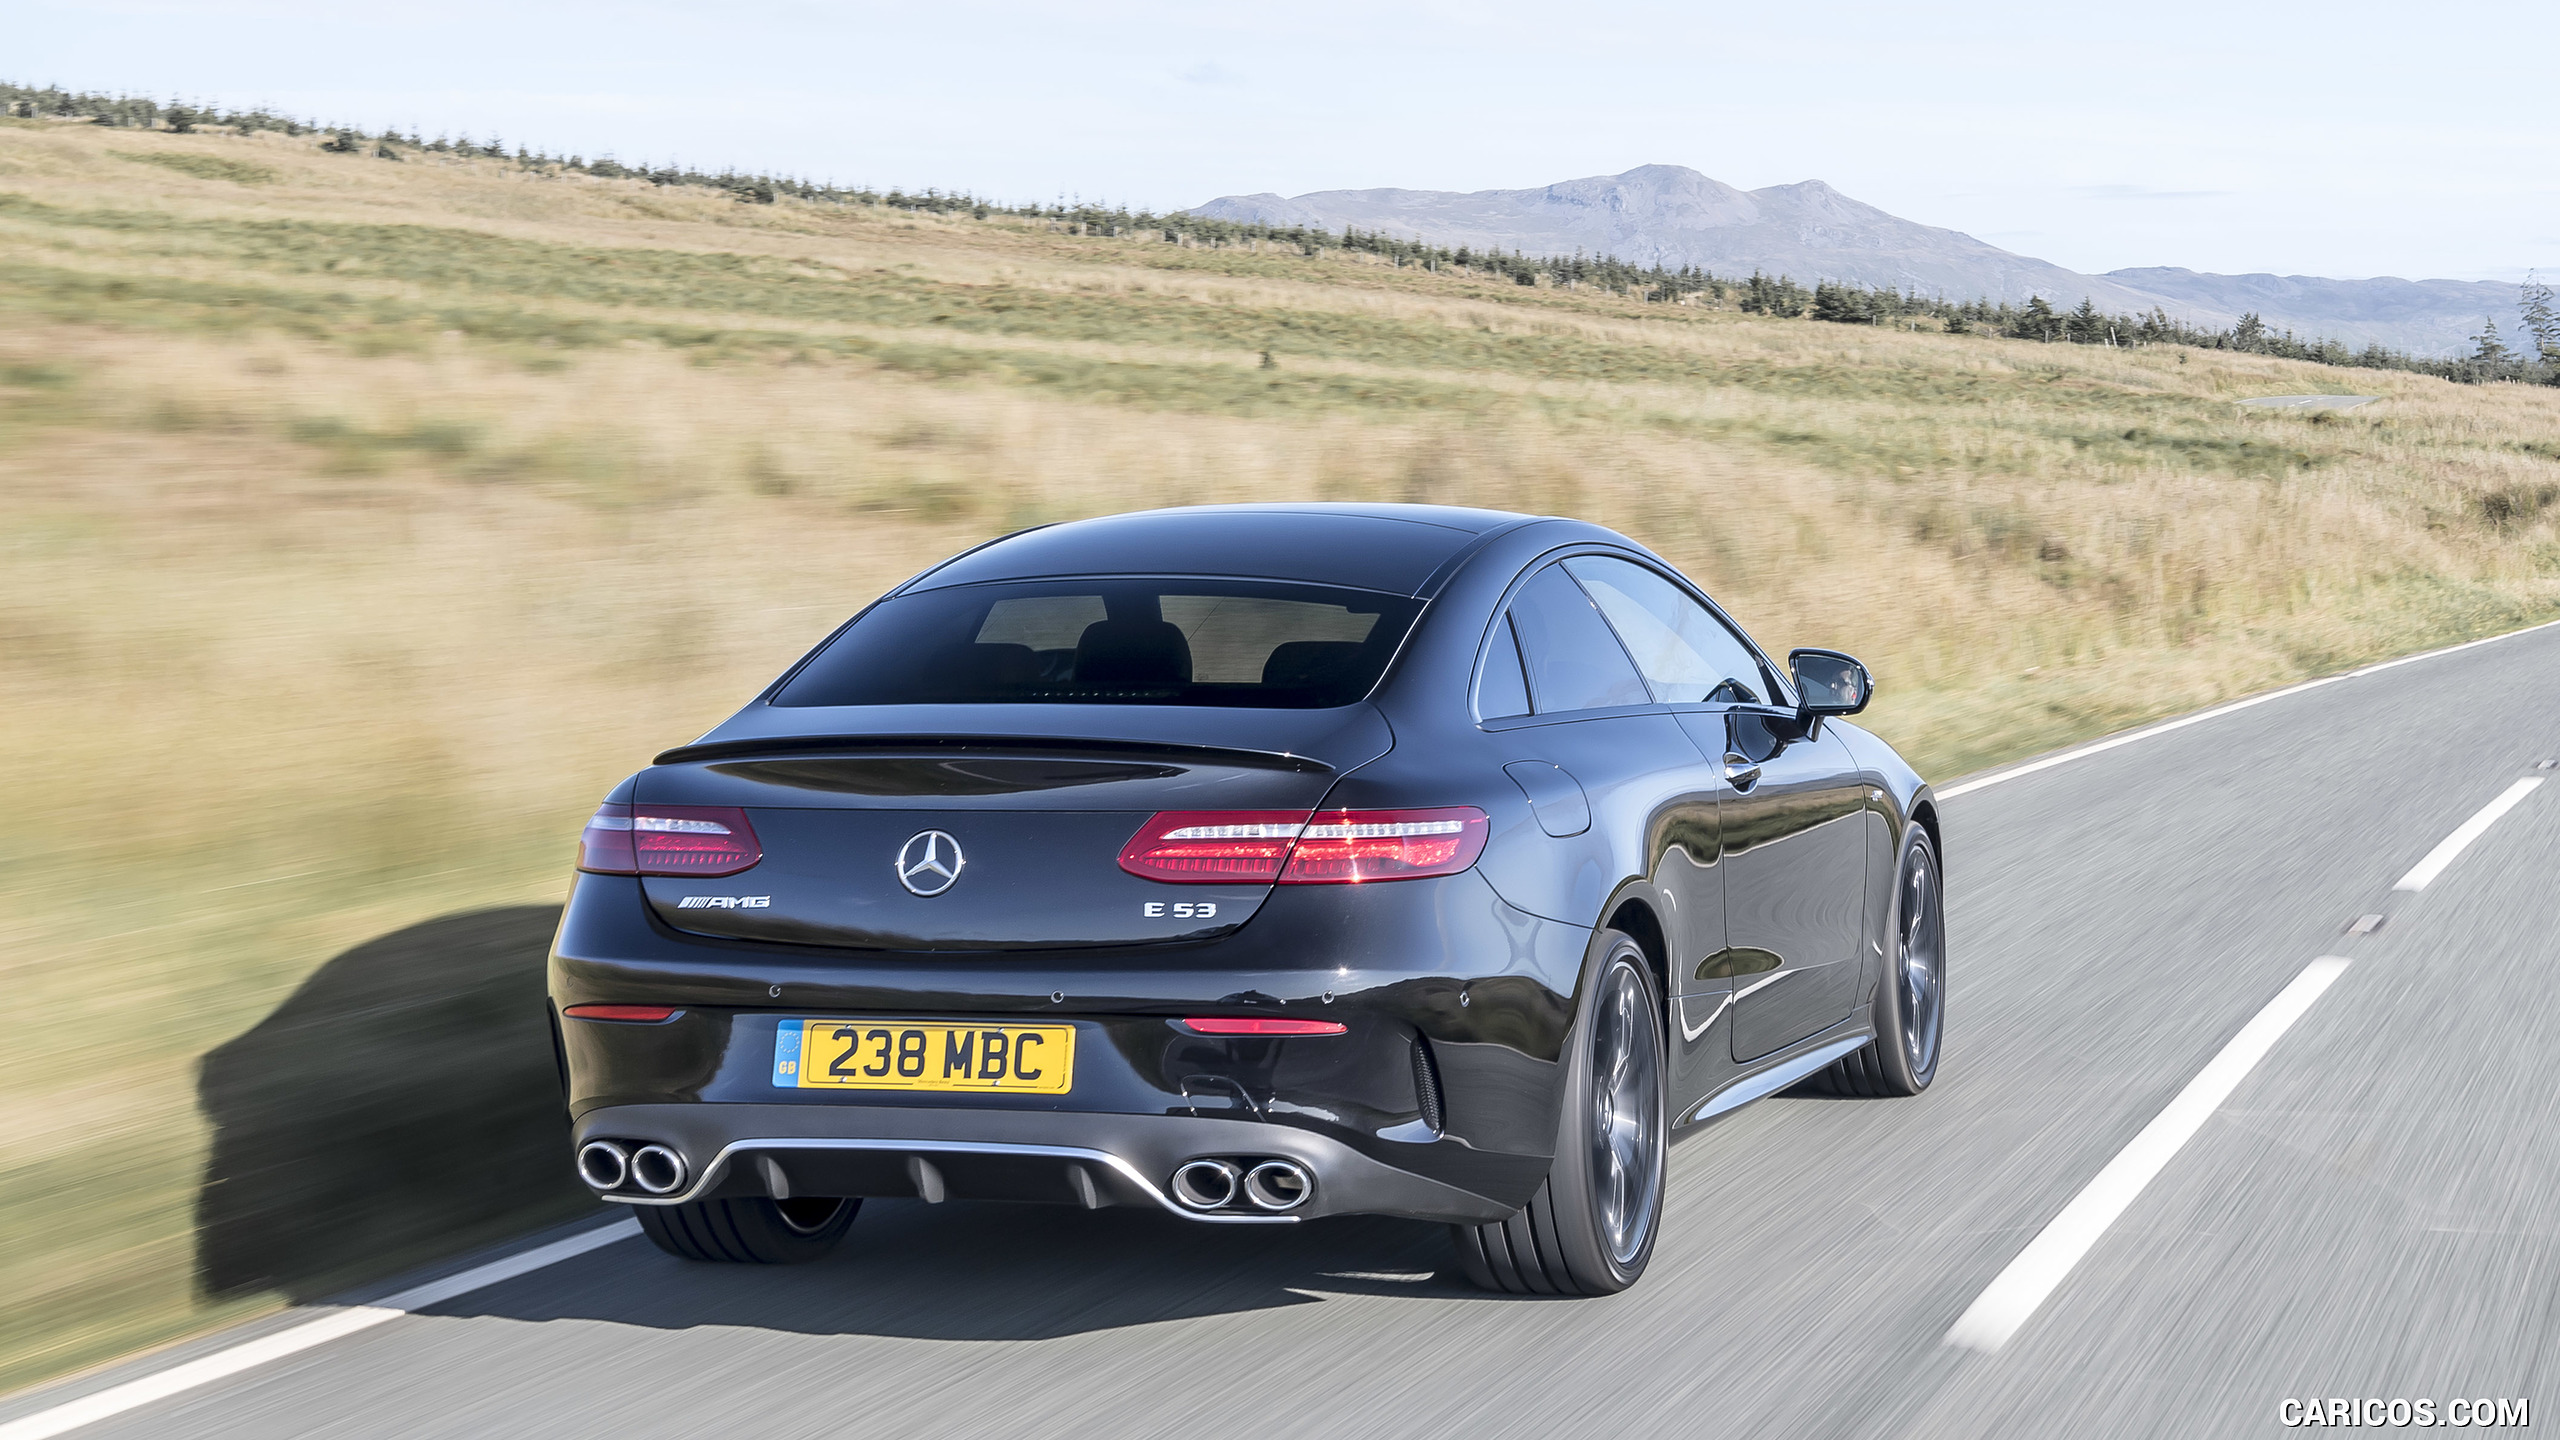 2019 Mercedes-AMG E 53 Coupe (UK-Spec) - Rear, #8 of 166